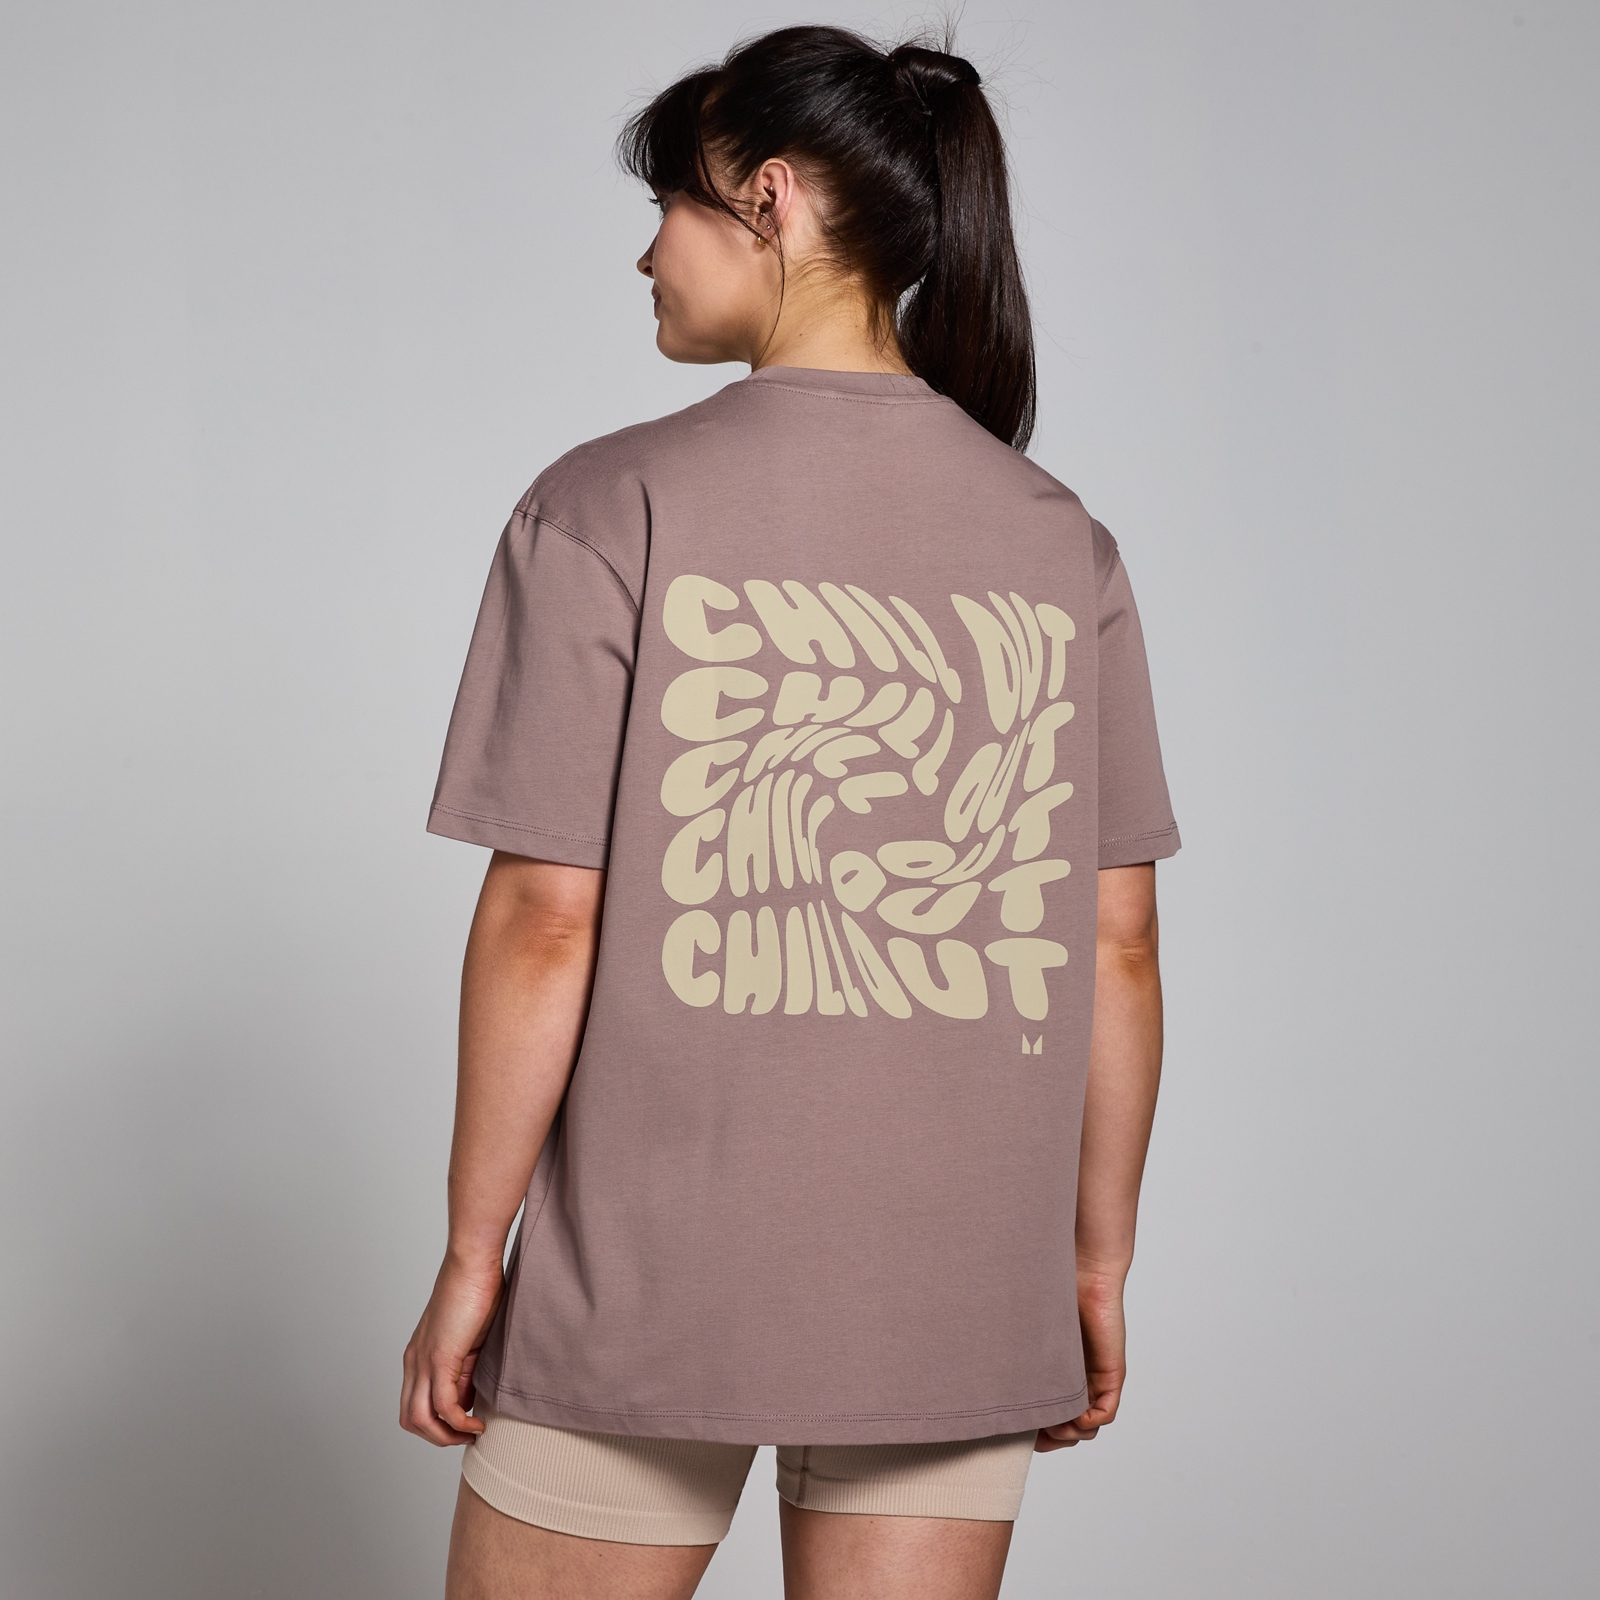 MP Tempo Better Oversized Chill Out Graphic T-Shirt - Hazelnut